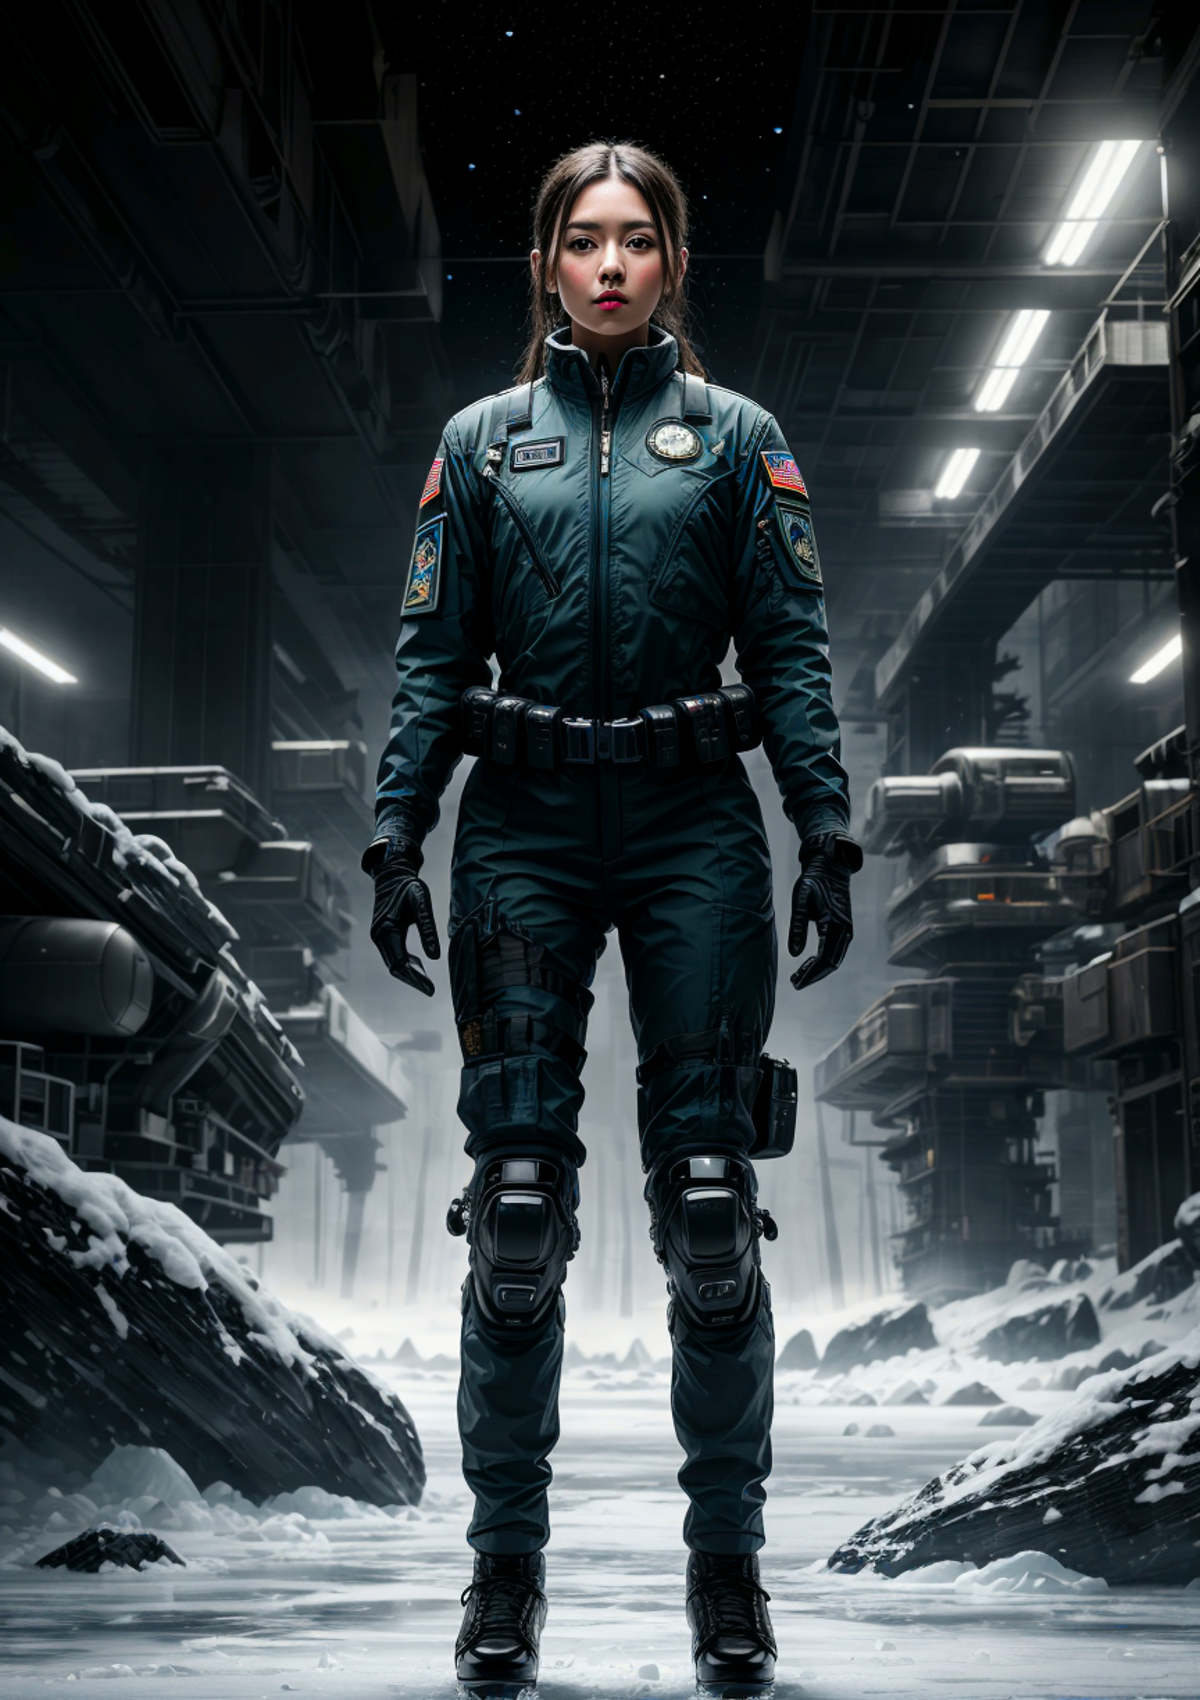 Sci-Fi Outfits - Wildcards image by Diva